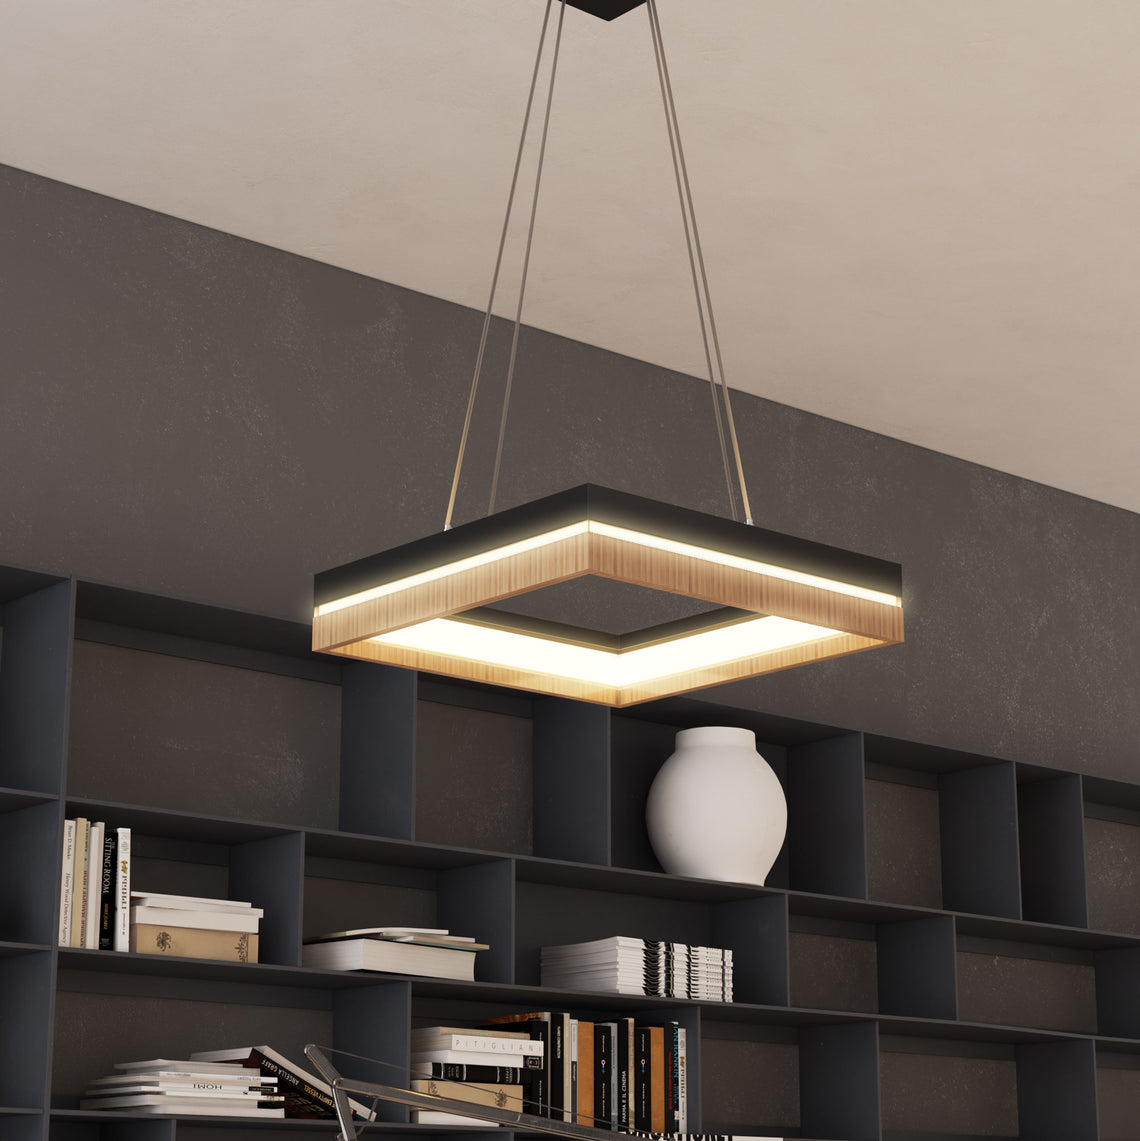 Square Metal and Wood - Chandelier - Lighting, 35W, 836 Lumens (Warm White), 3000K Dimmable, Matte Black + Wood Body Finish